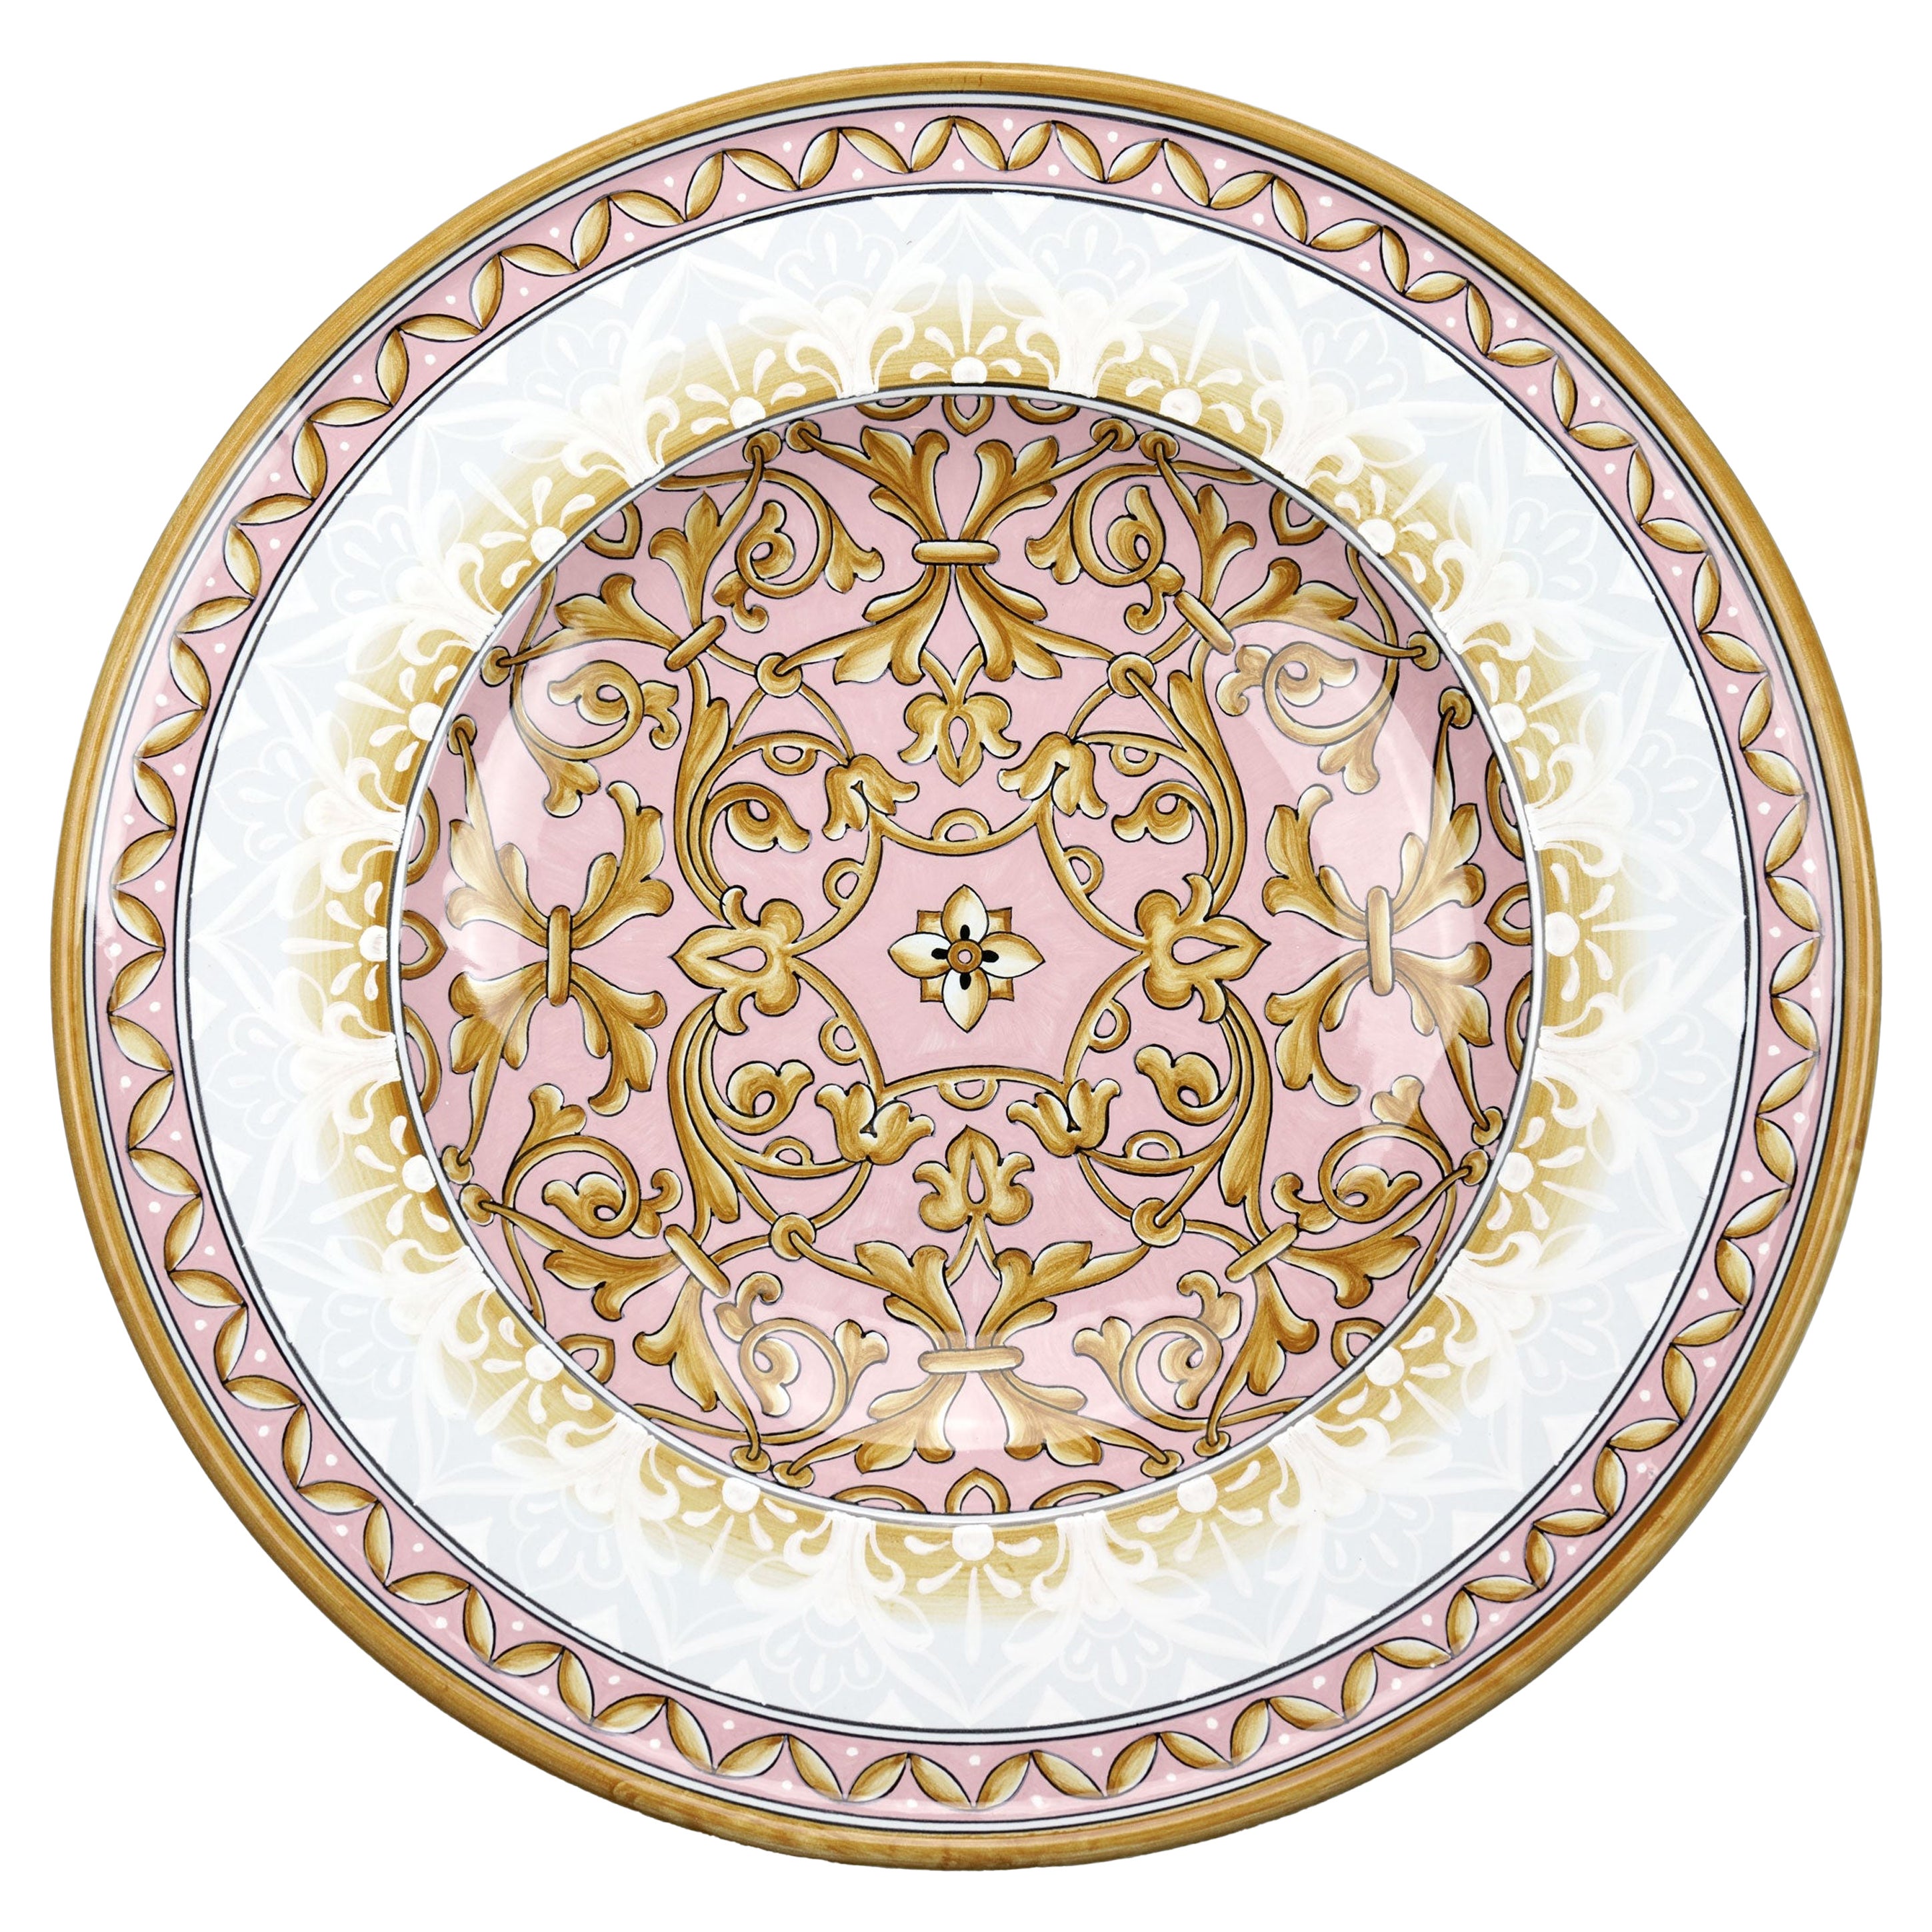 Plate or Bowl Centerpiece Majolica, Wall Dish Decorated, Pink White, In Stock